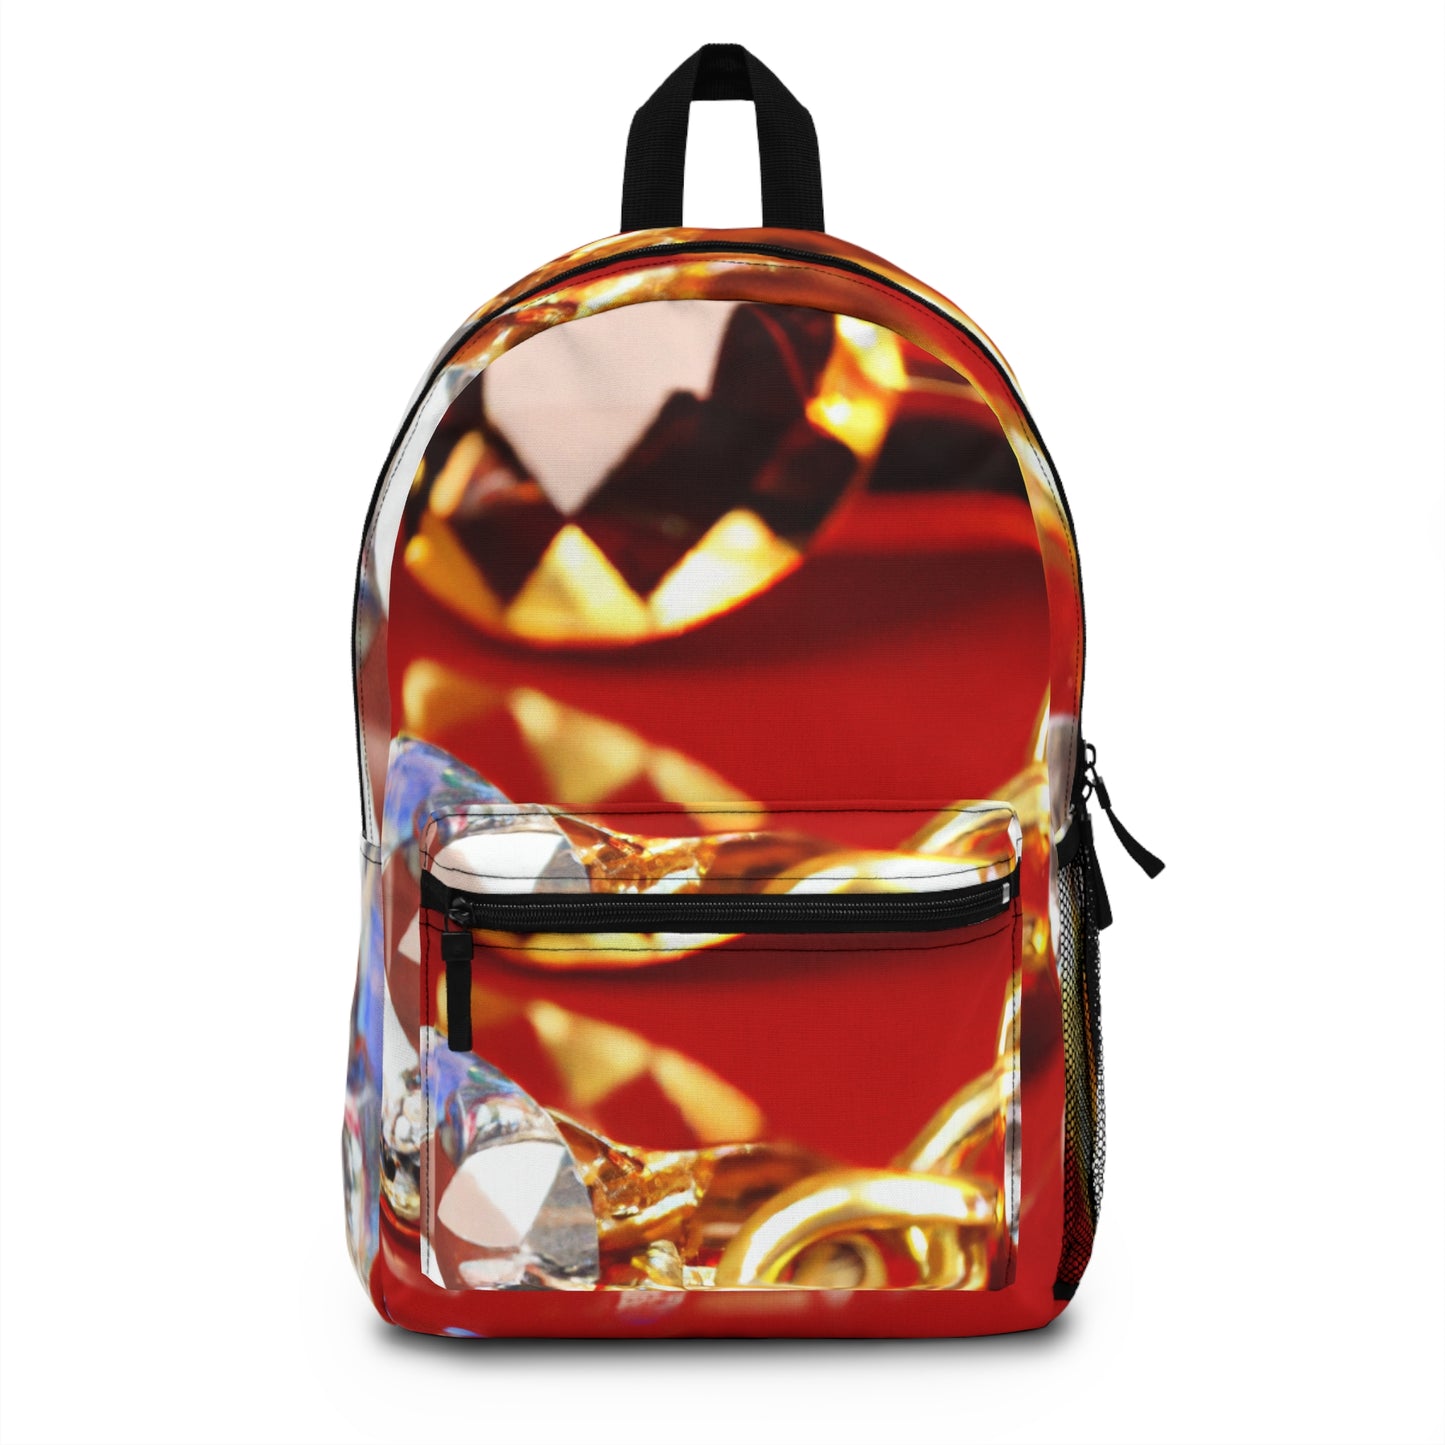 Gridicus Goldfinger - Backpack